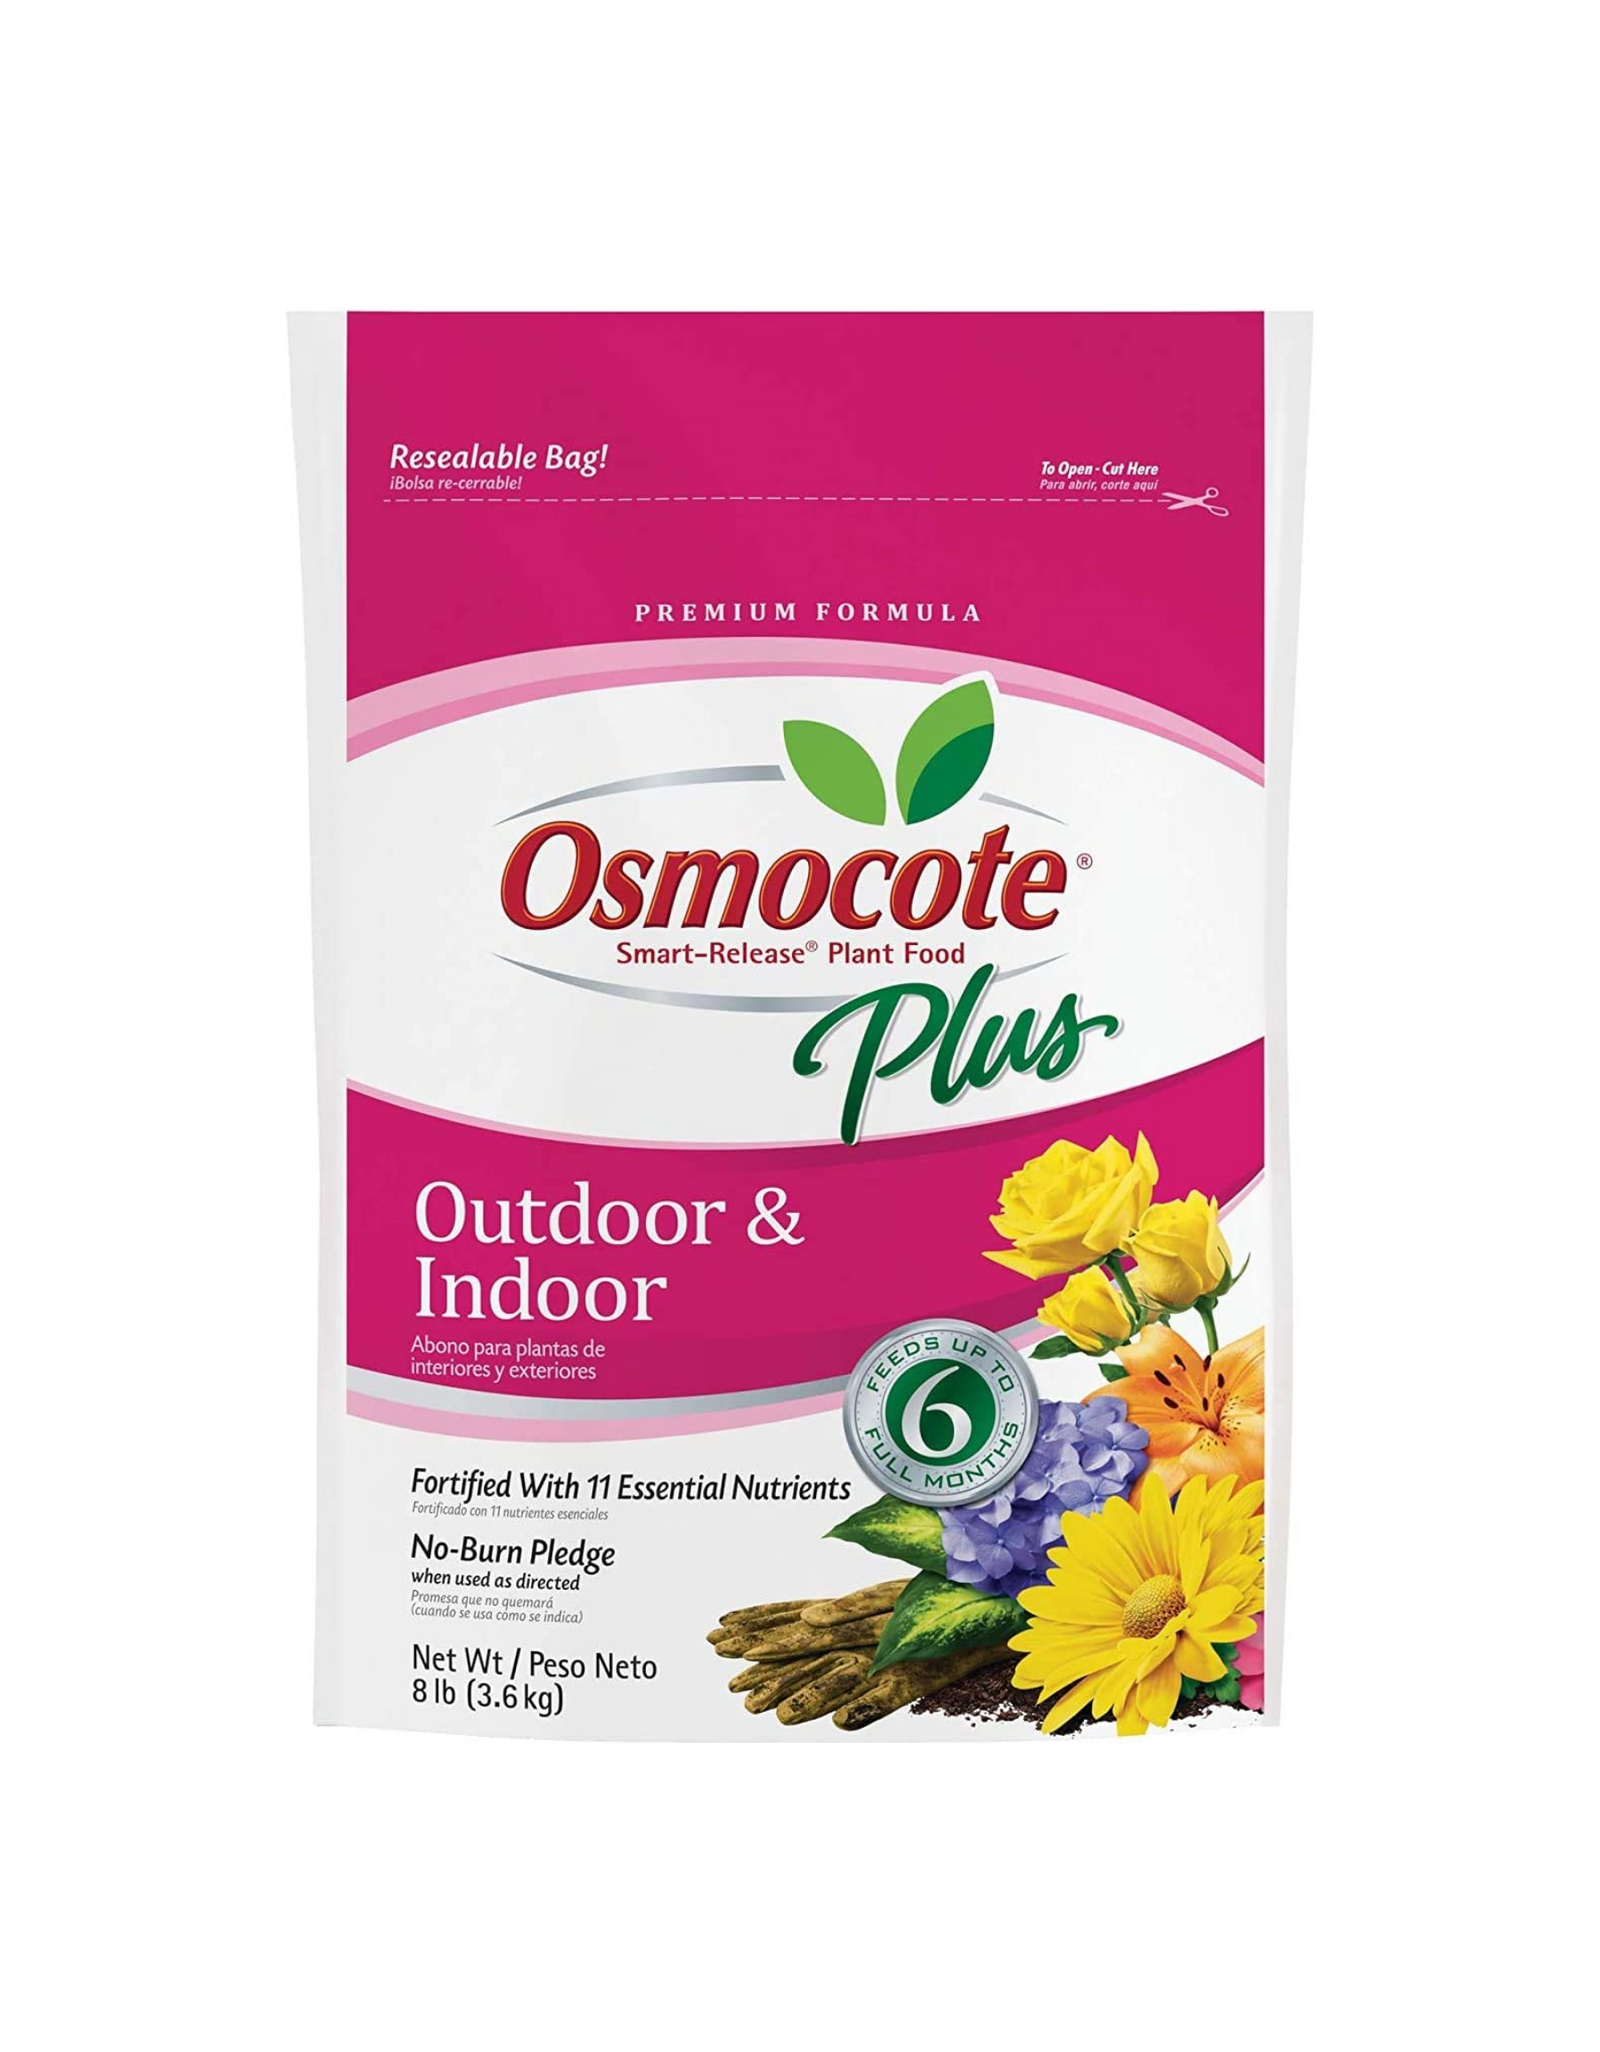 Osmocote Smart-Release Plant Food Plus Outdoor & Indoor, 8 lb. - Fortified with 11 Essential Nutrients